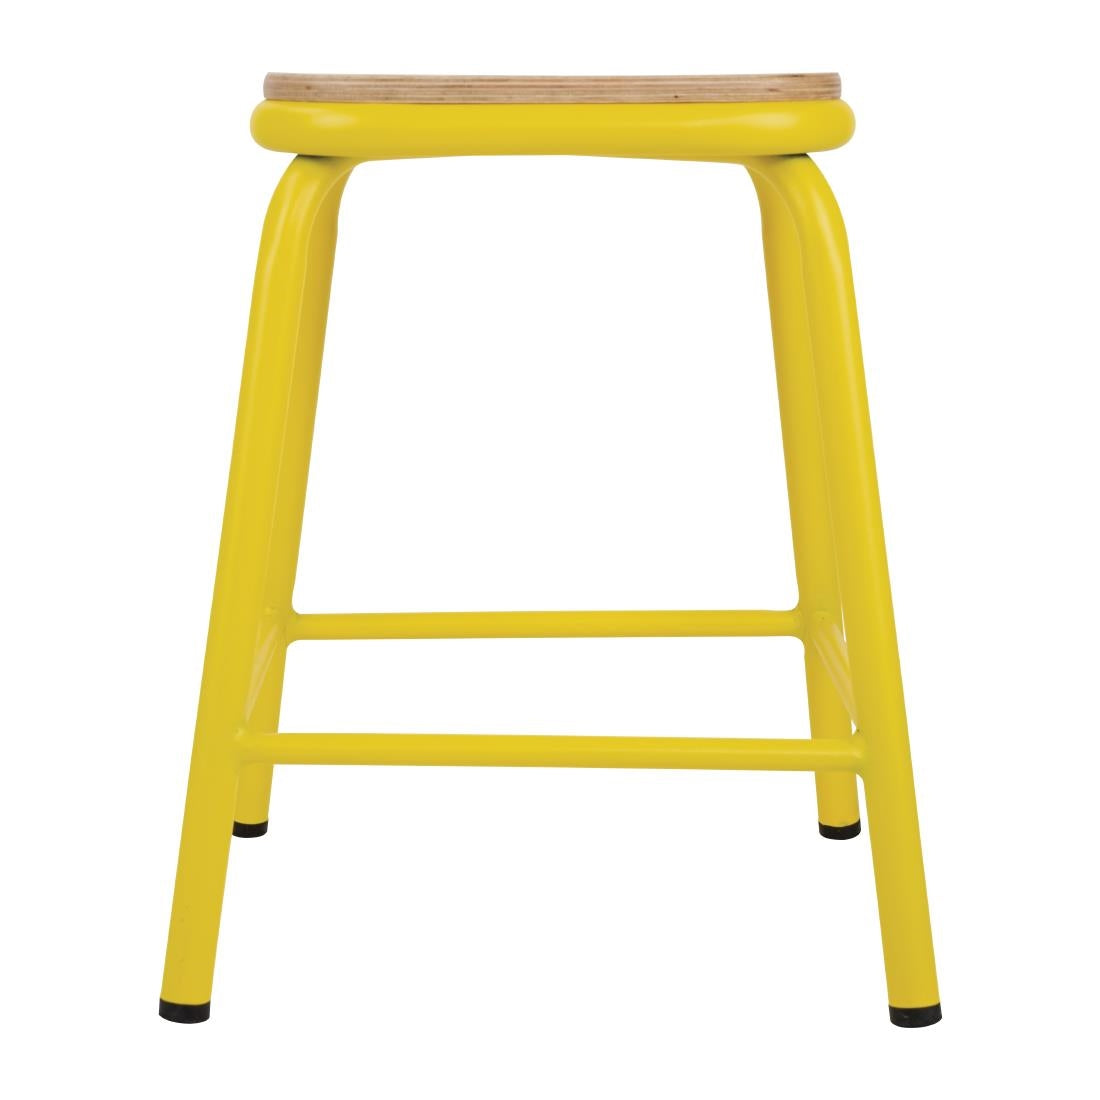 Bolero Cantina Stools with Wooden Seat Pad (Pack of 4) JD Catering Equipment Solutions Ltd